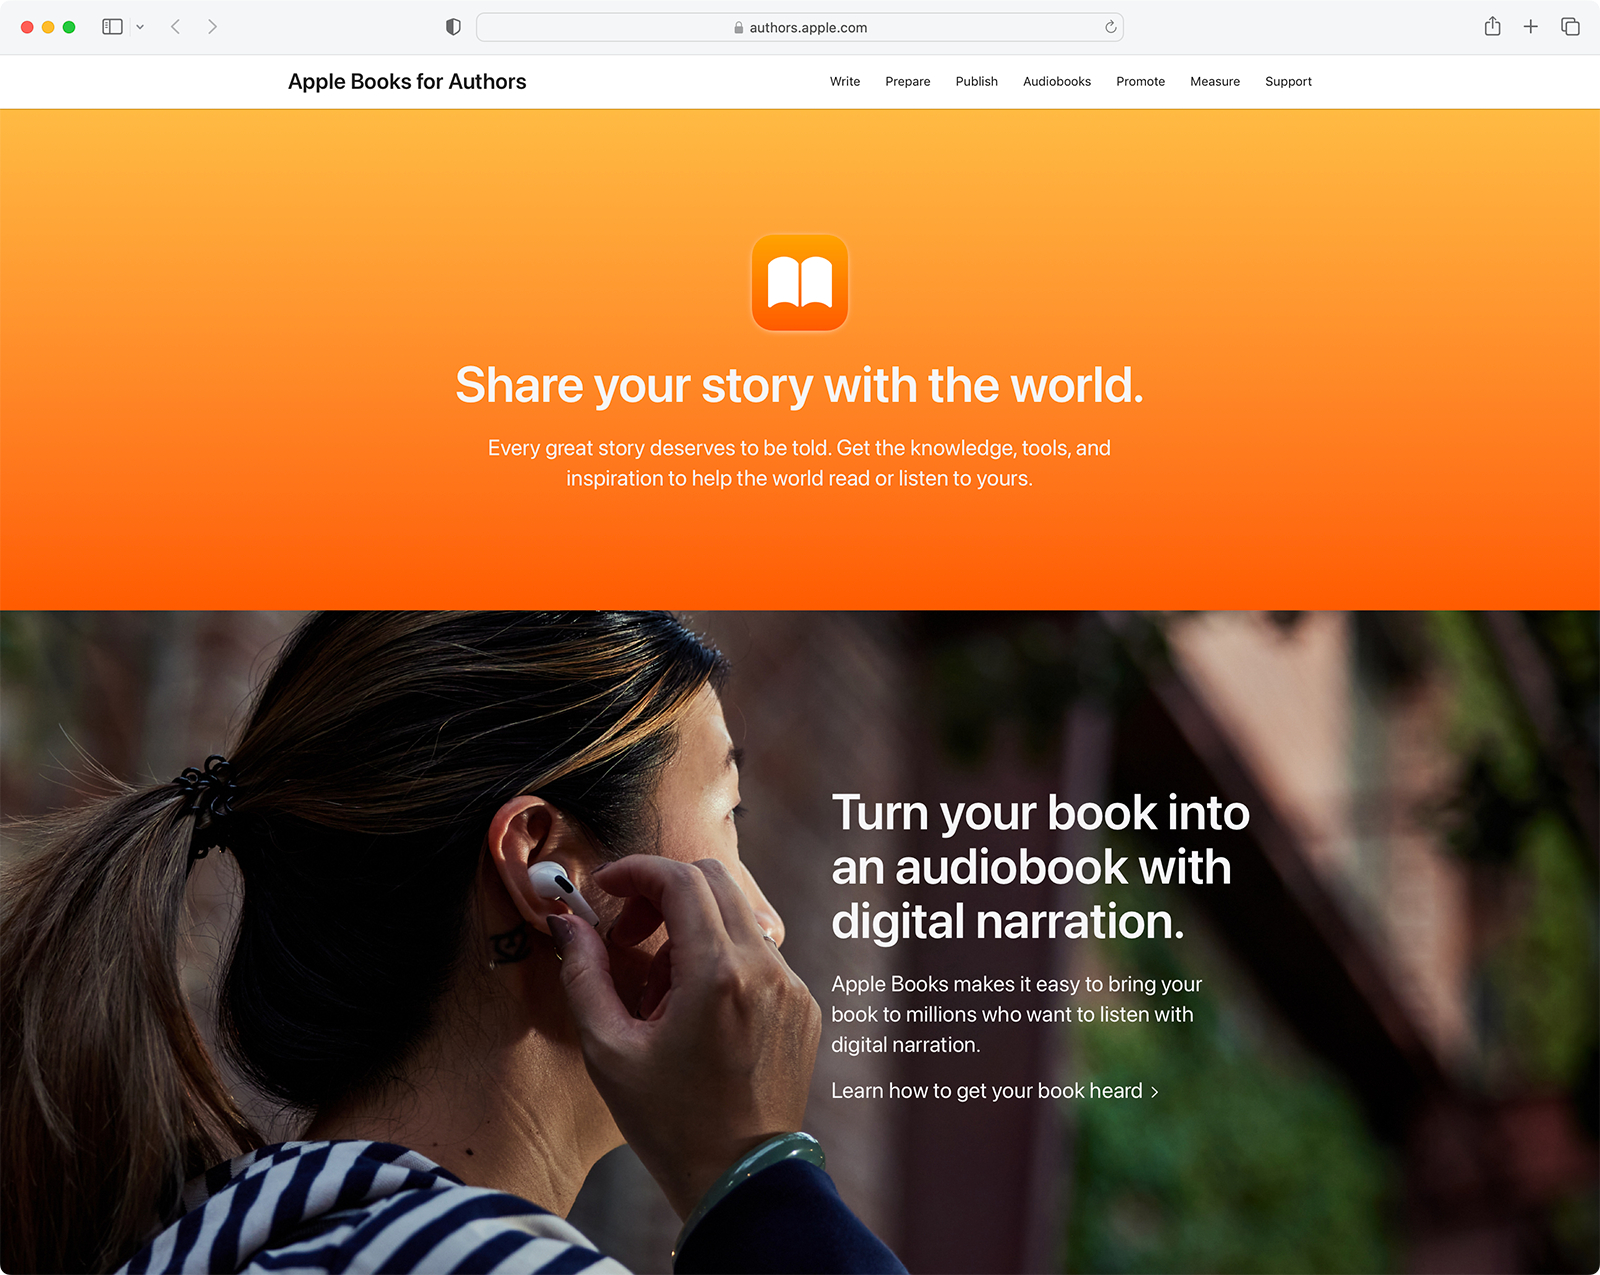 The Apple Books for Authors homepage.